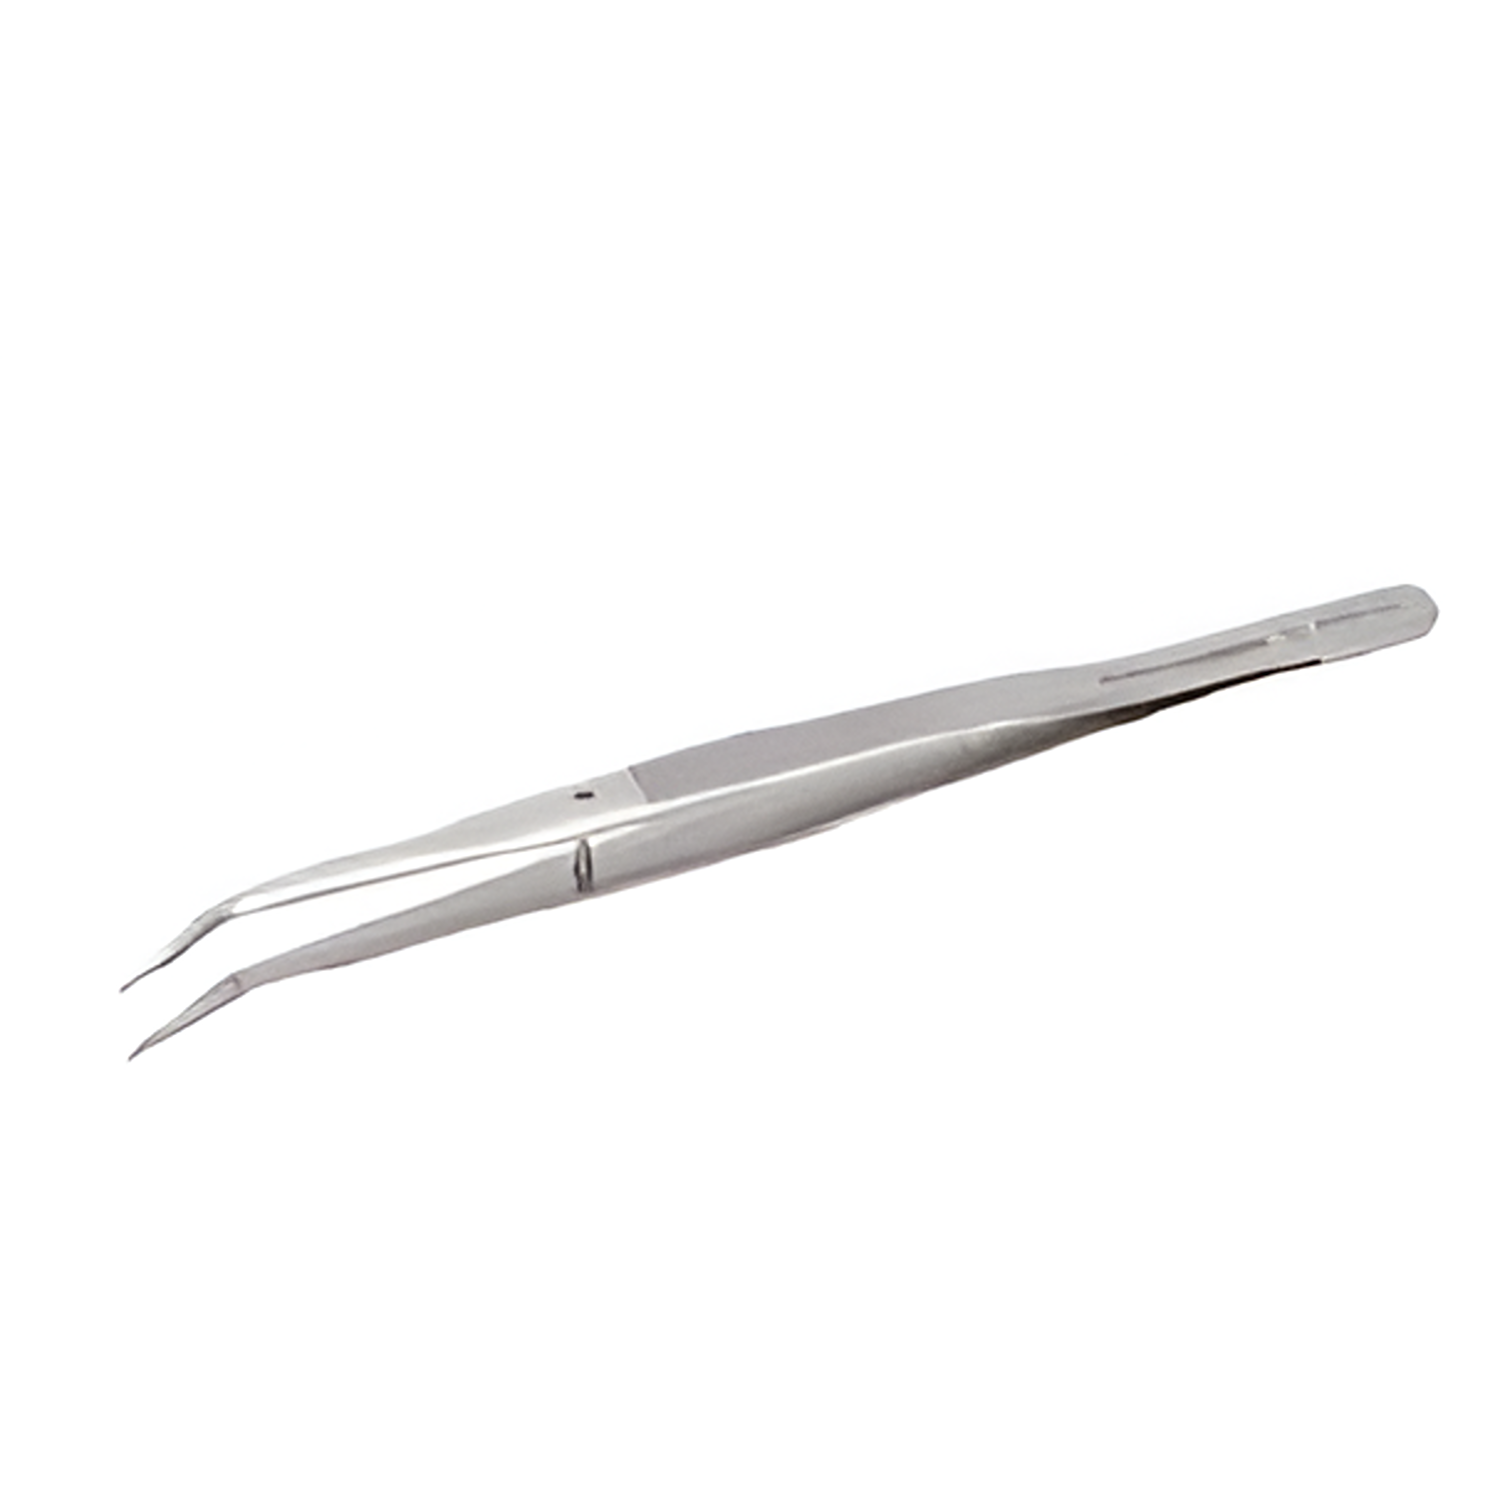 BAHCO TL 649-SA General Purpose Stainless Steel Tweezers - Premium Tweezers from BAHCO - Shop now at Yew Aik.